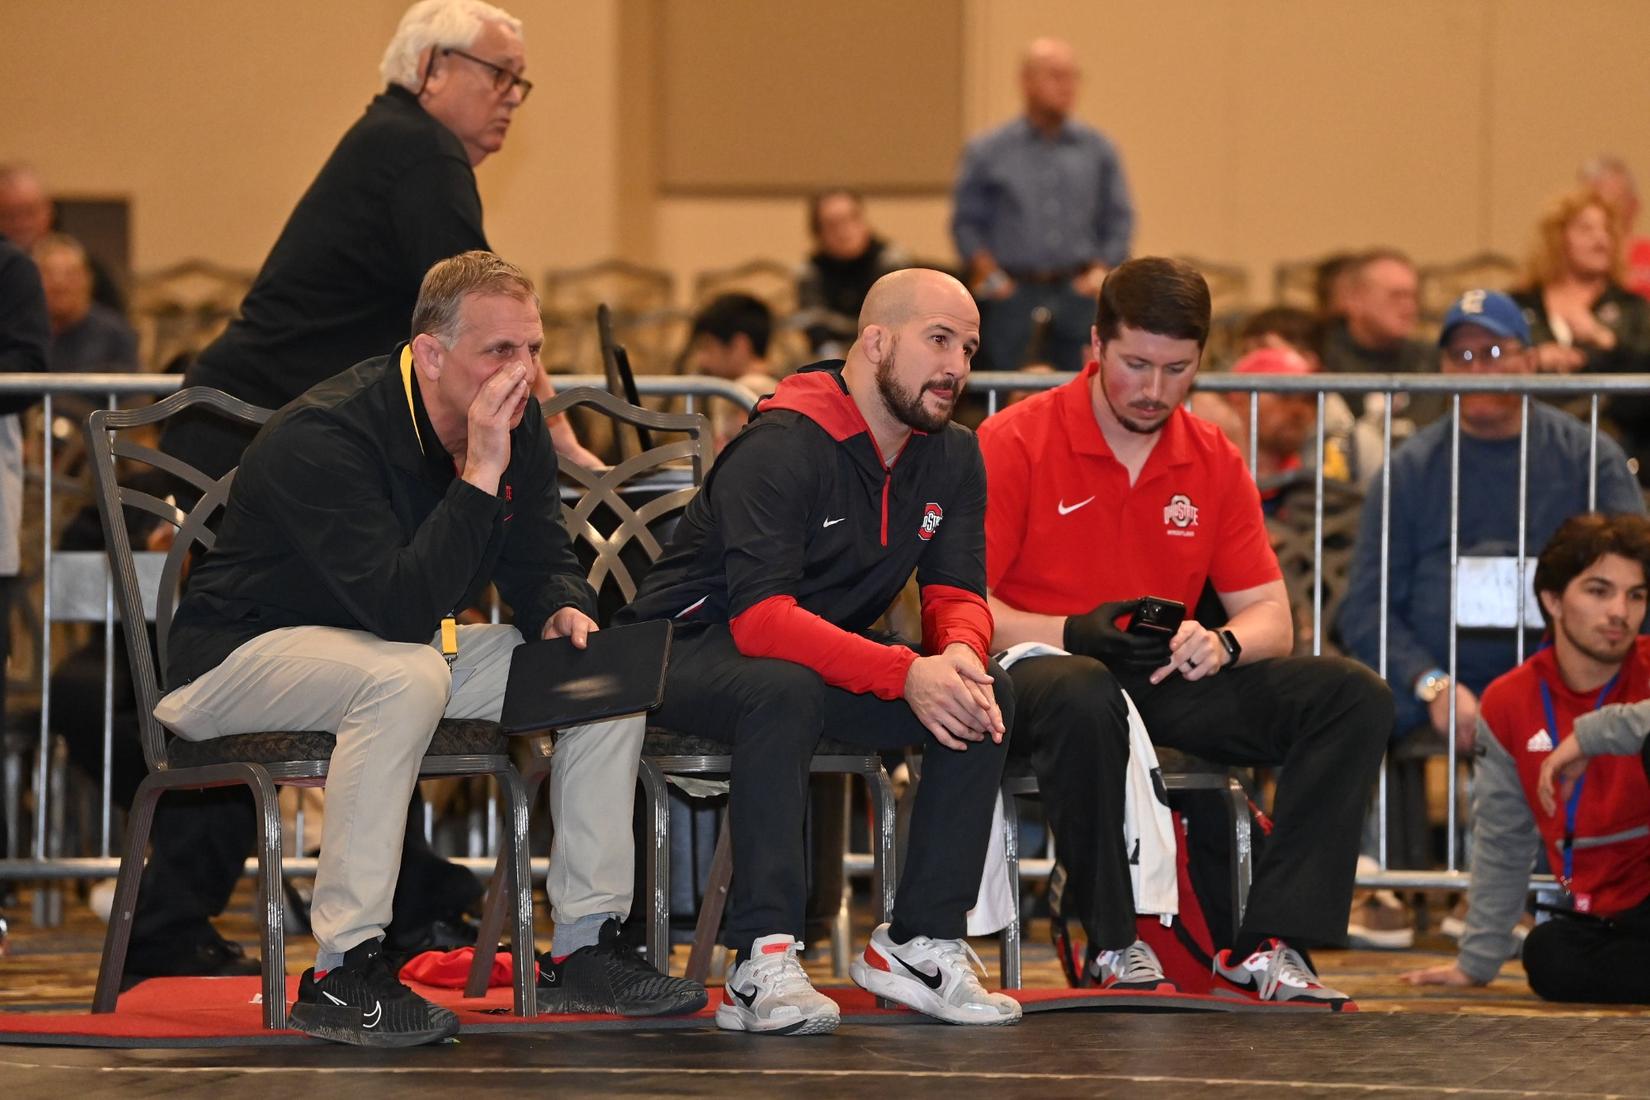 5 Of Ohio State's Greatest Hits At The Cliff Keen Las Vegas - FloWrestling